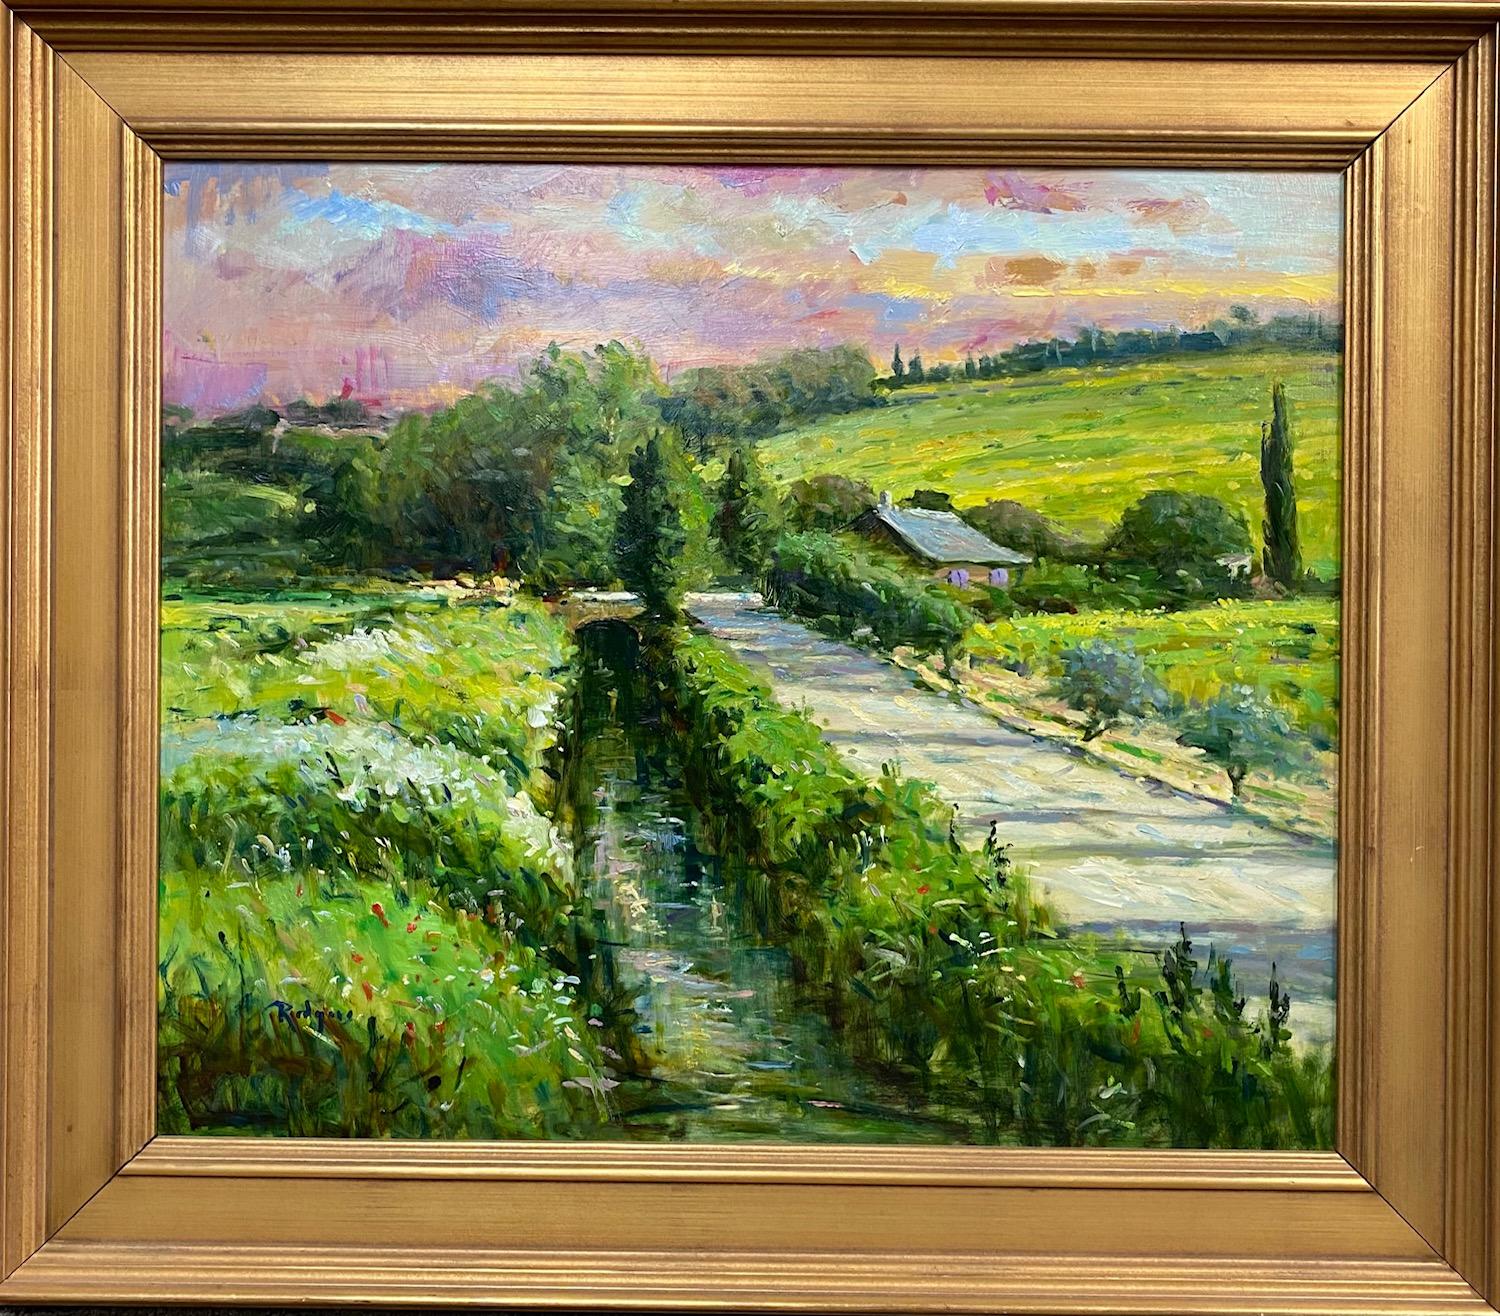 Jim Rodgers Landscape Painting - Morning Light in Chateauneuf du Pape, original French impressionist landscape